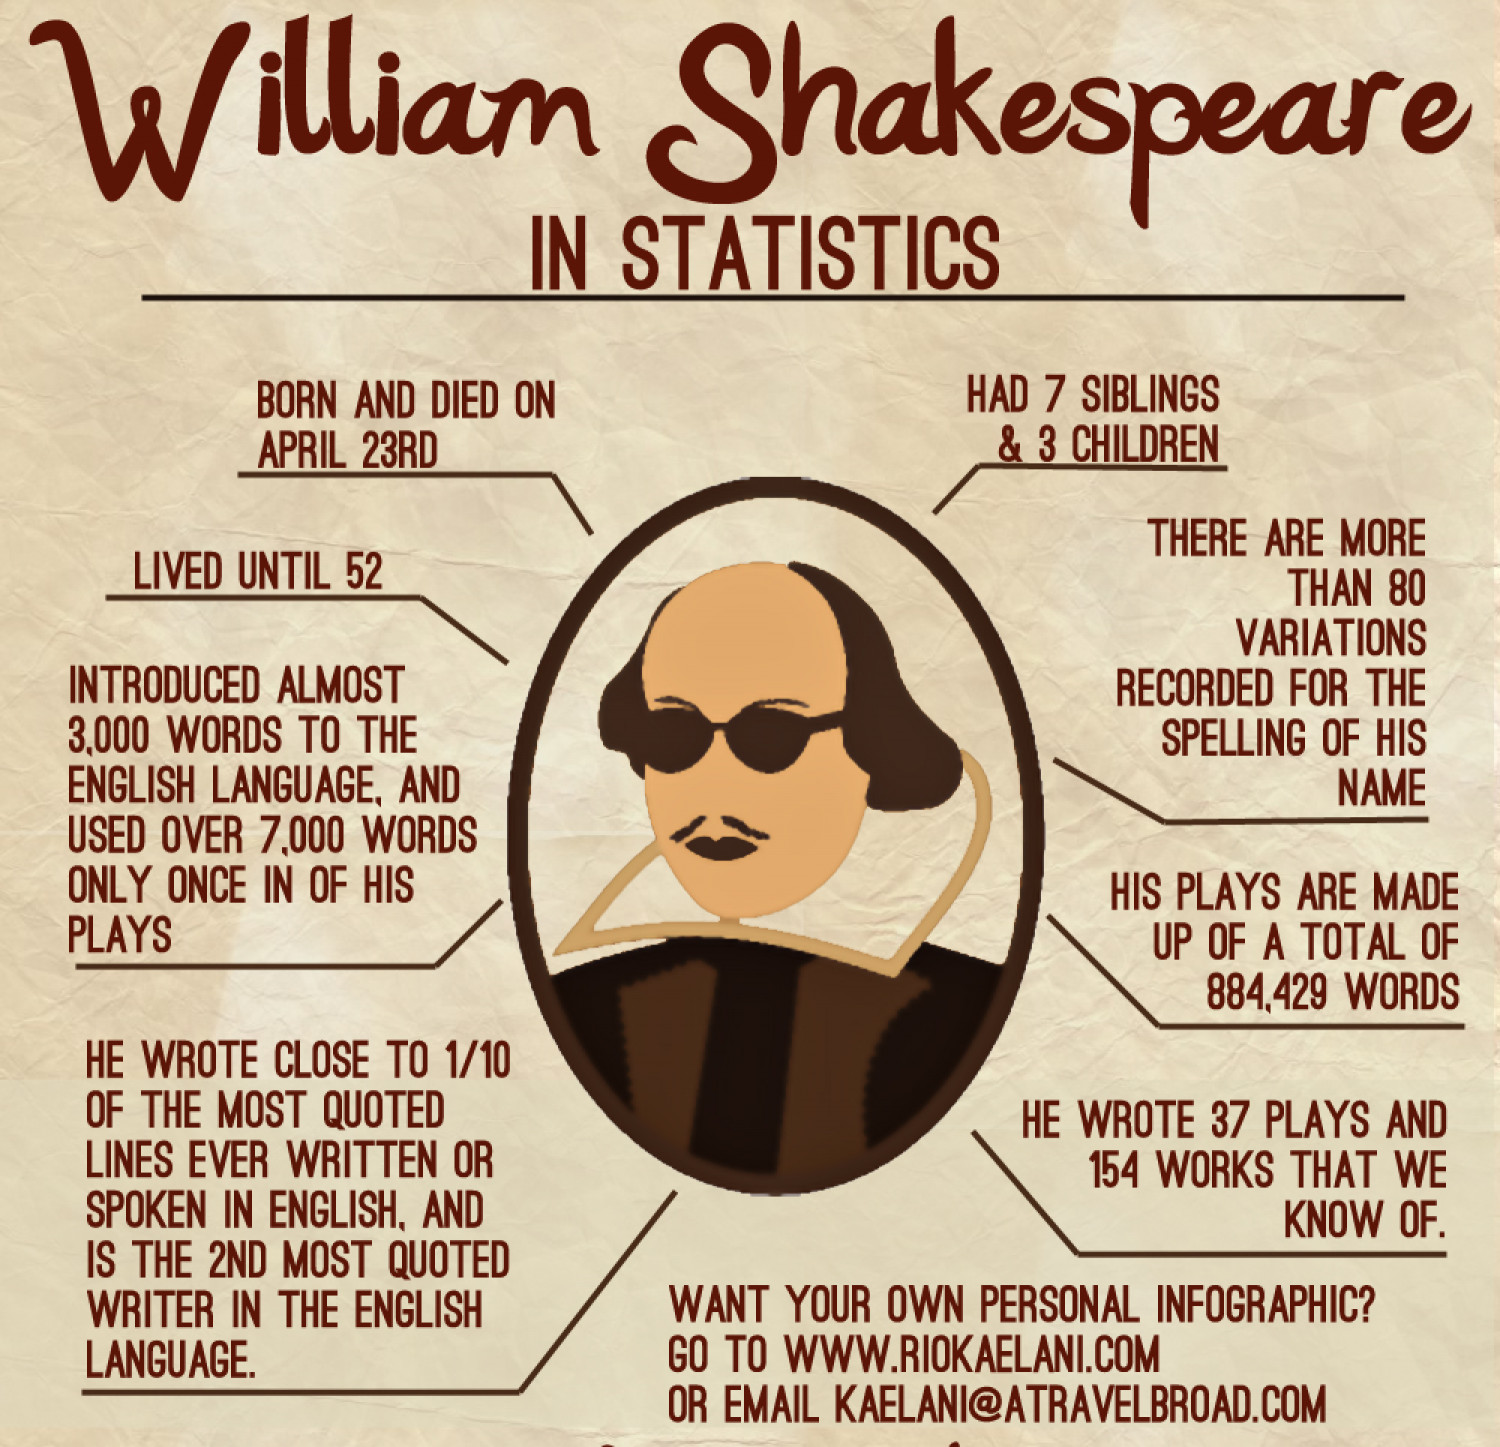 How To Create An Infographic About William Shakespeare